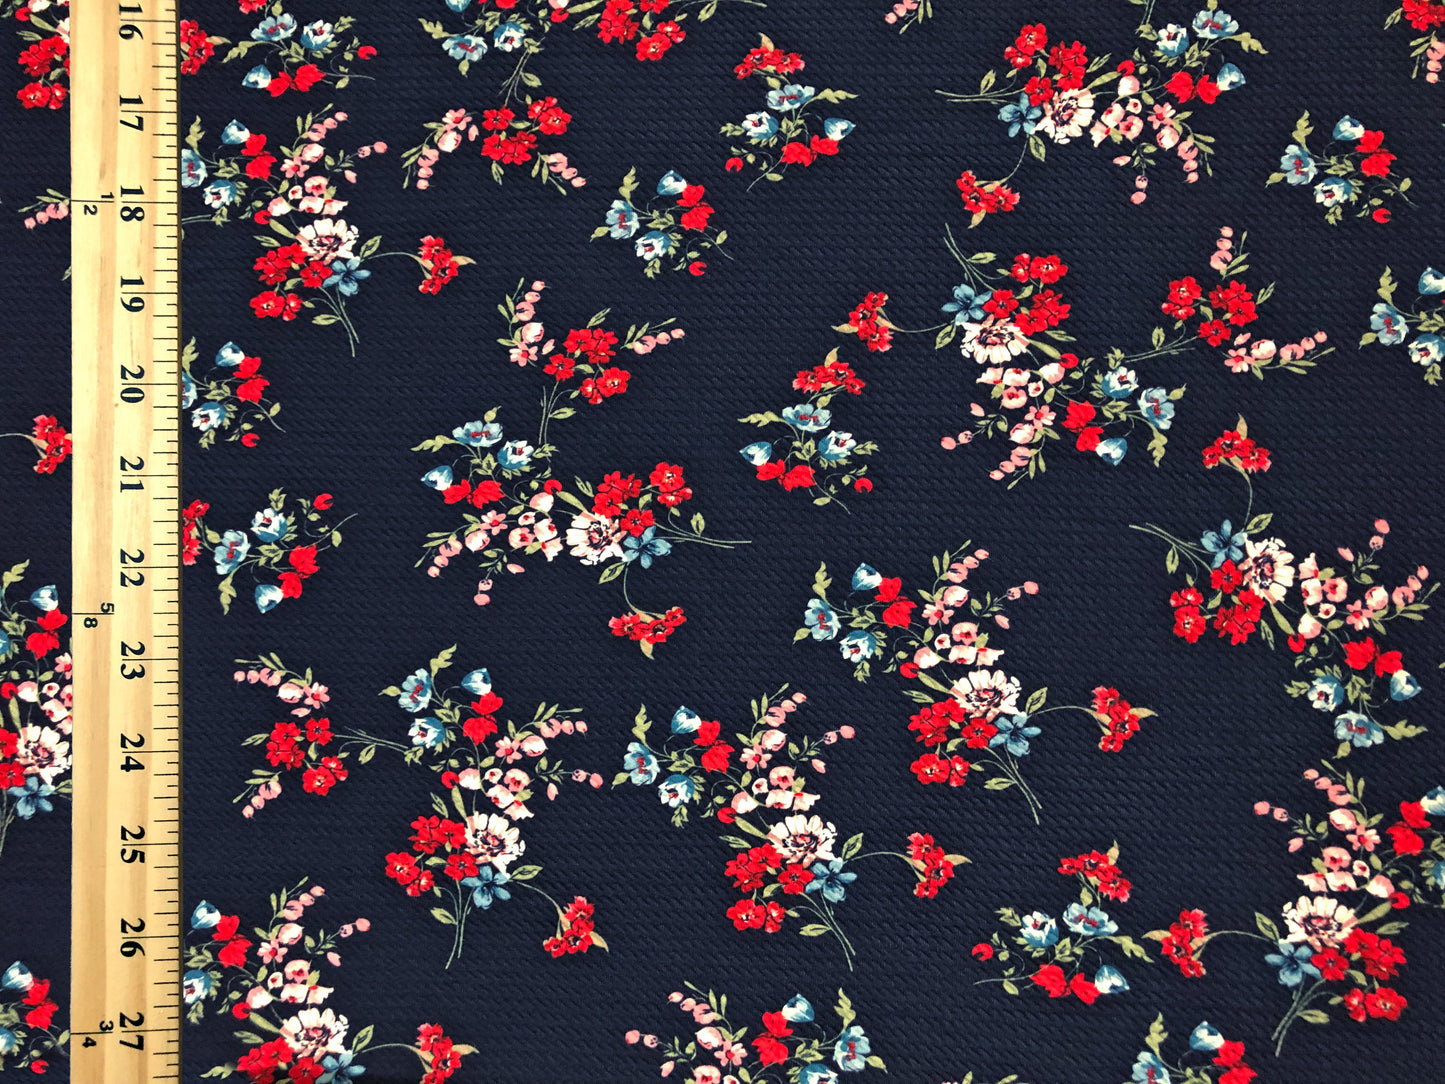 Bullet Knit Printed Fabric-Navy Blue Red Flowers-BPR271-Sold by the Yard